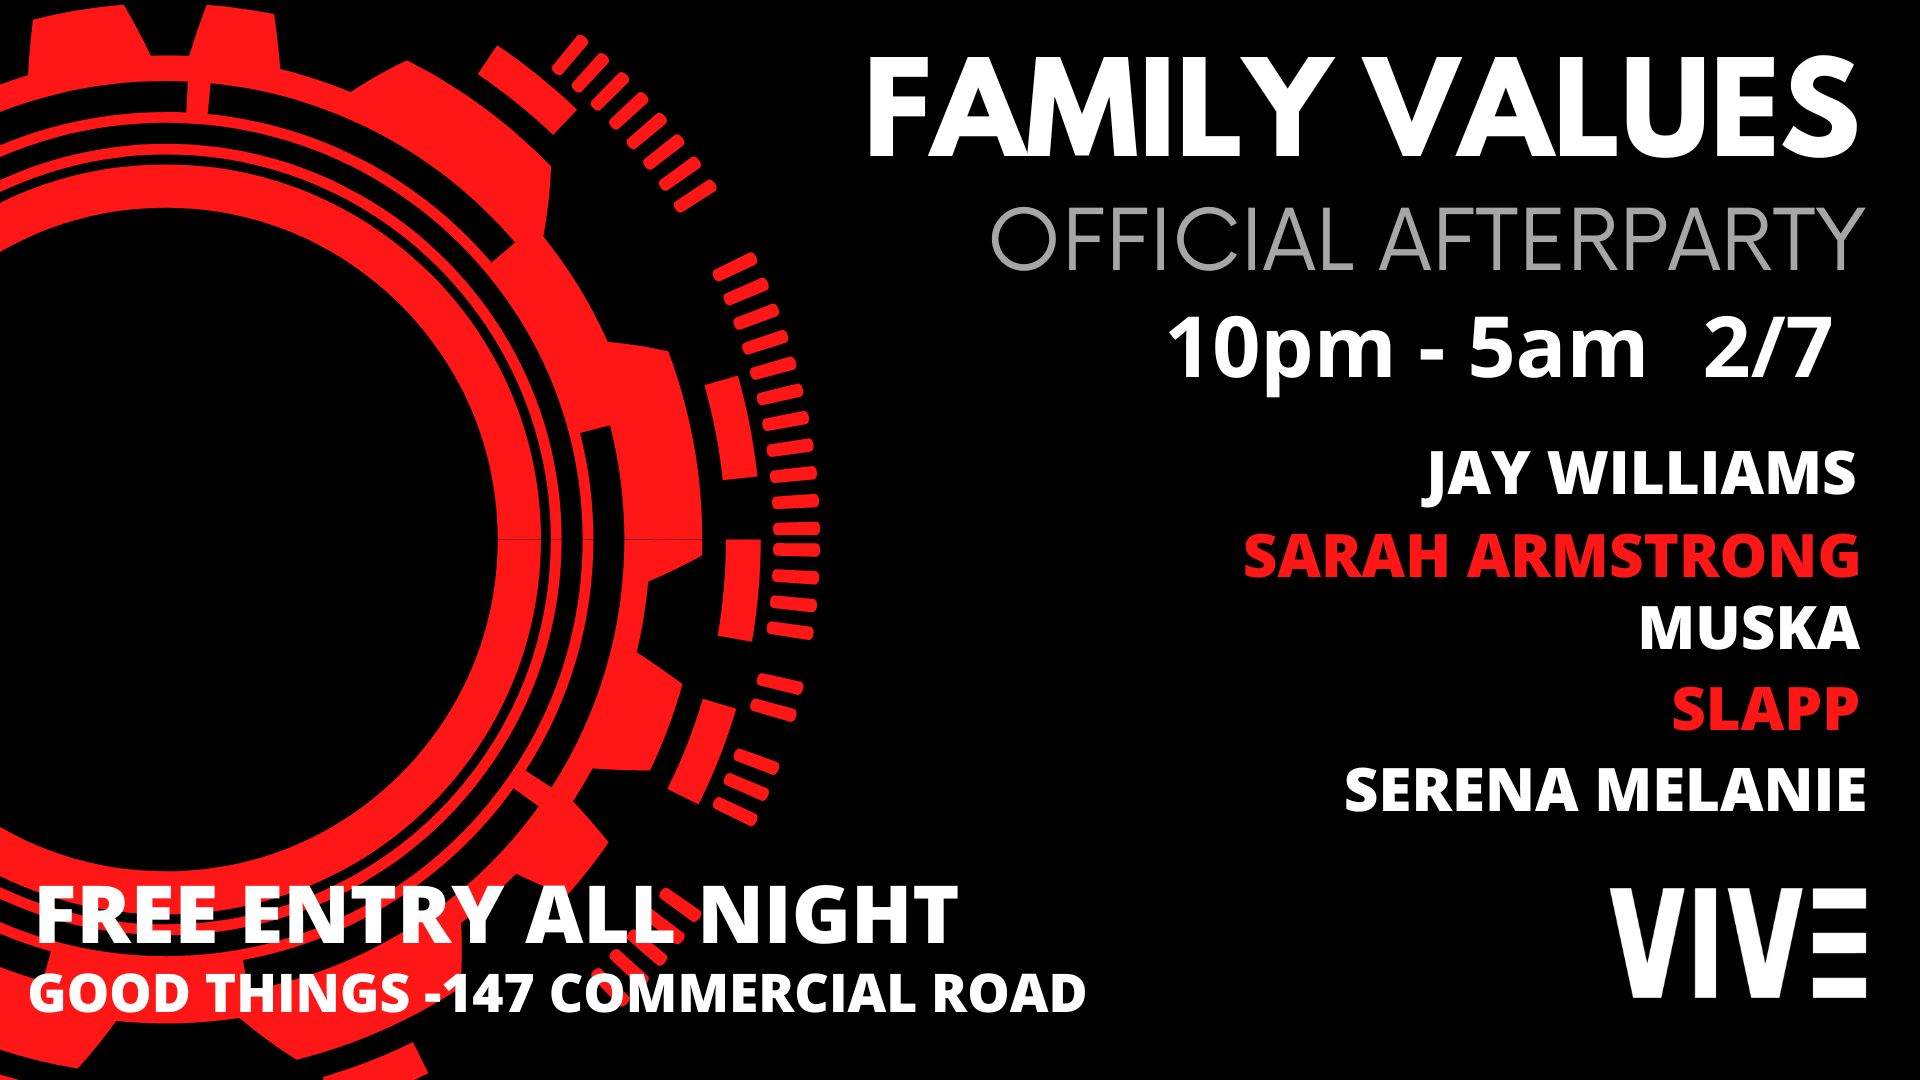 VIVE - FAMILY VALUES - OFFICIAL AFTER PARTY - フライヤー表